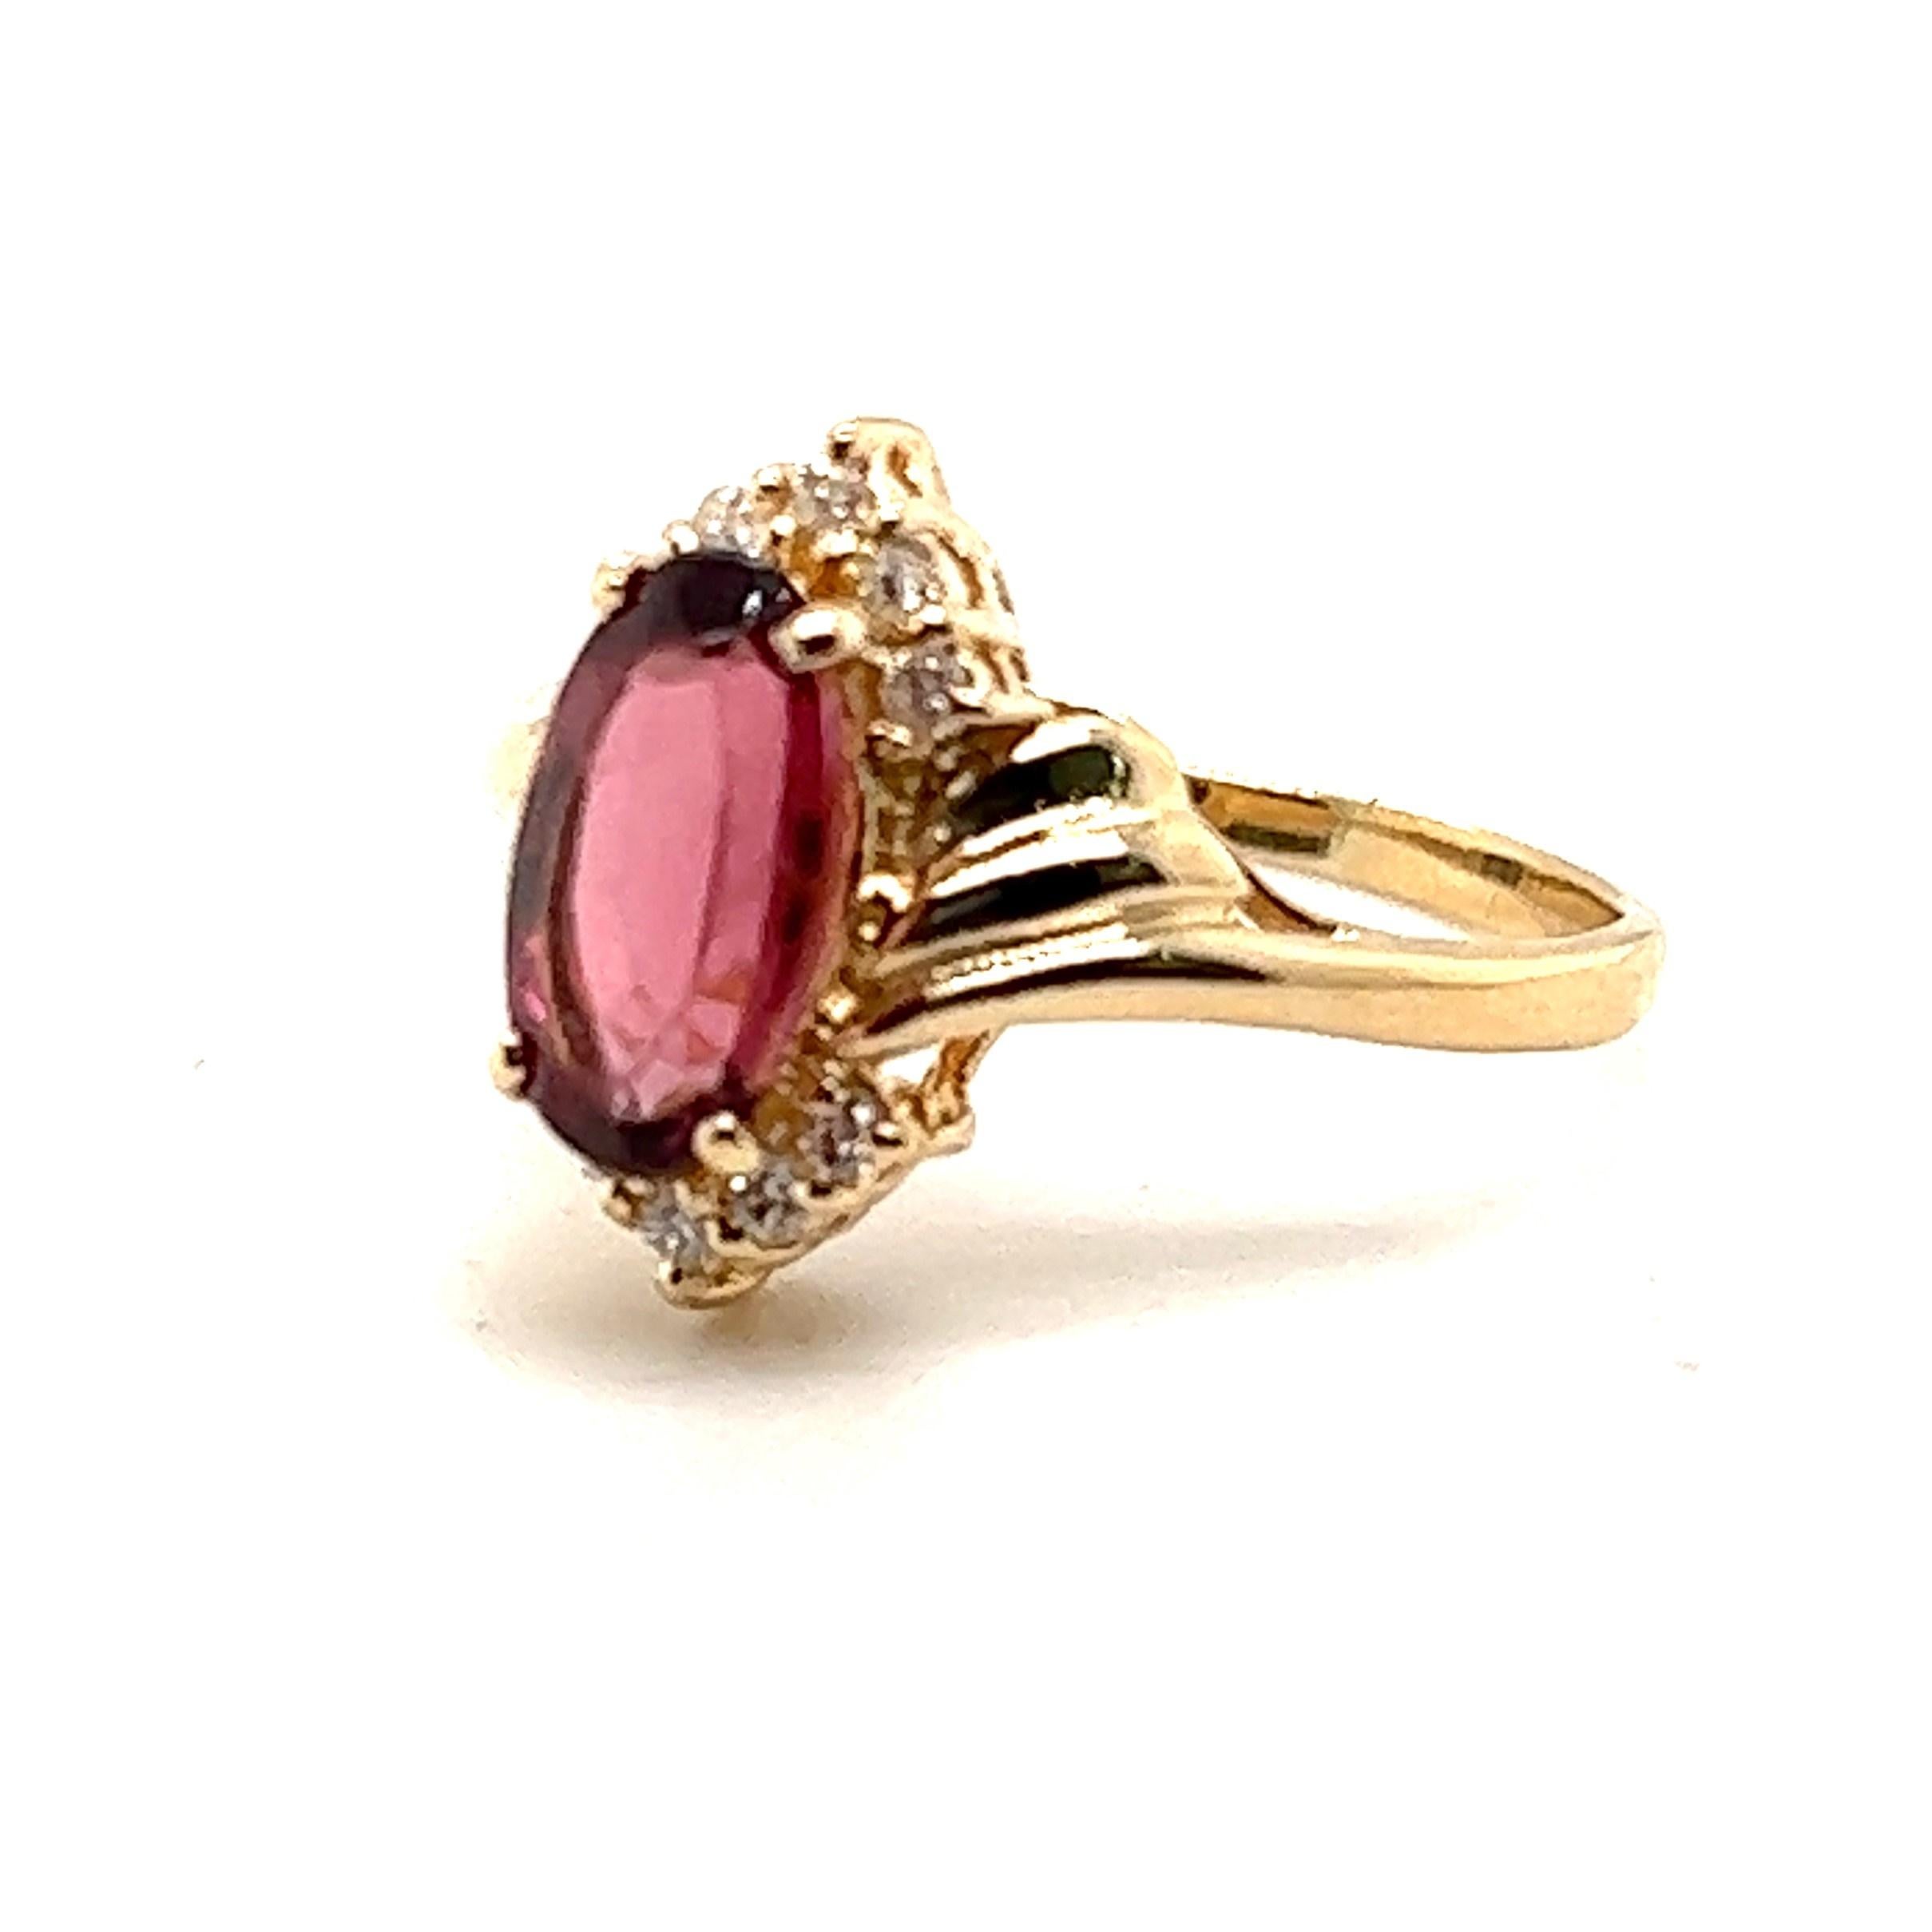 Fit for a princess. 

14K yellow gold 1.67ct  Pink Tourmaline ring with .10 carats of  H-I/I1-I2 diamonds. 

The ring is a finger size 7.50 and measures 5.8 inch high at the top by about .25 inch wide. 